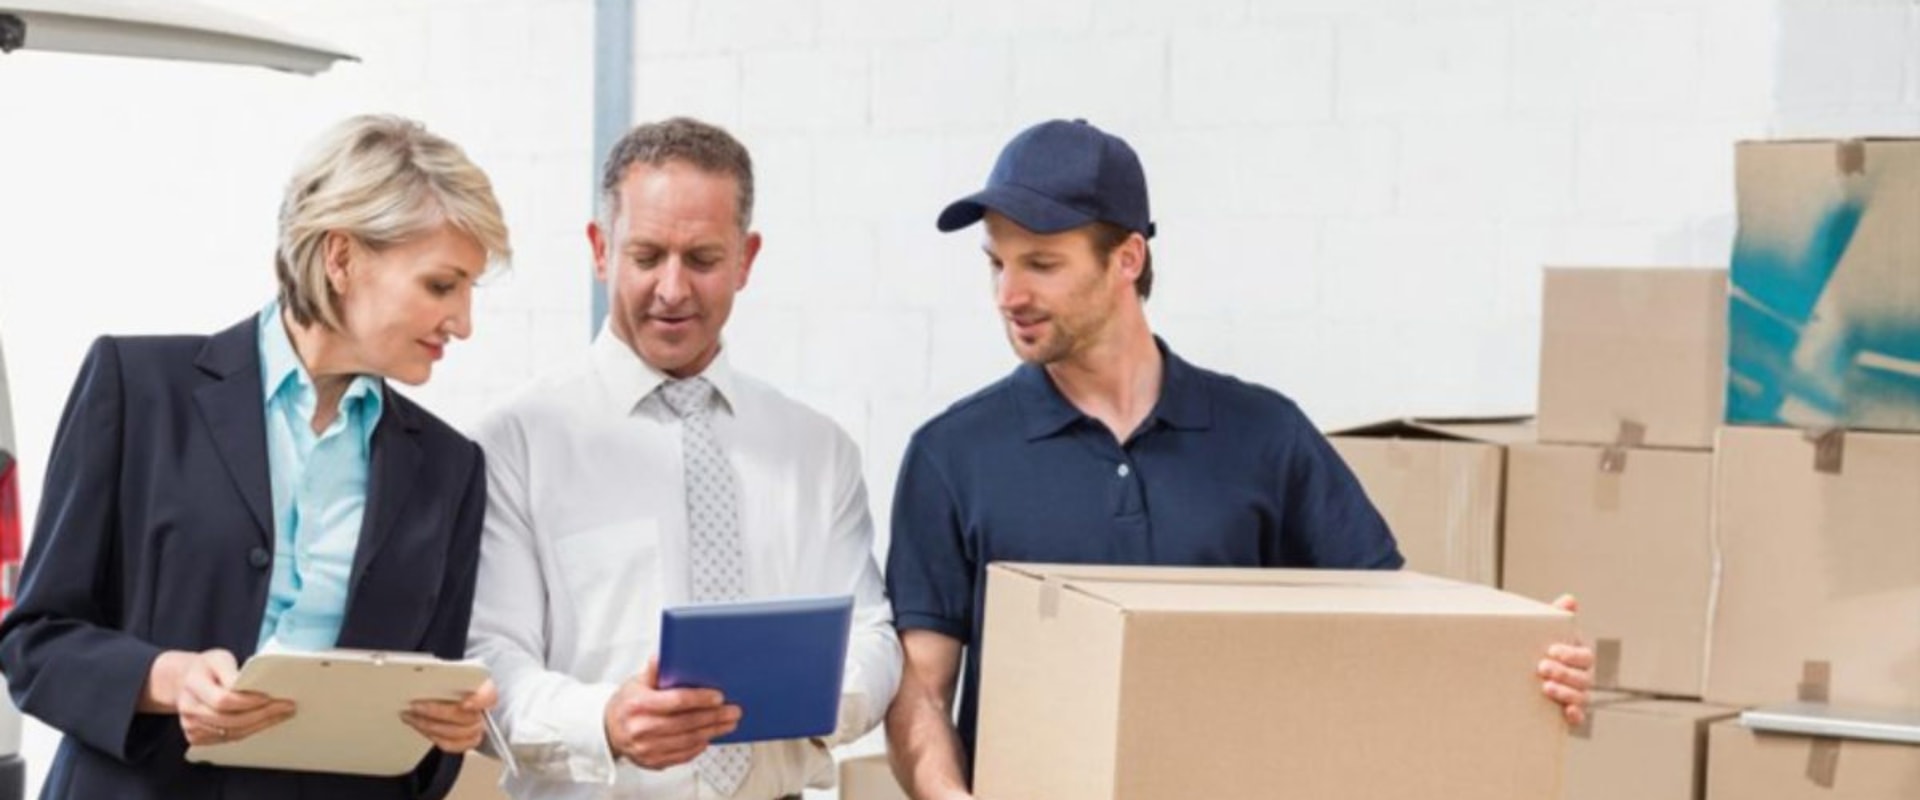 Comparing Quotes from Professional Movers